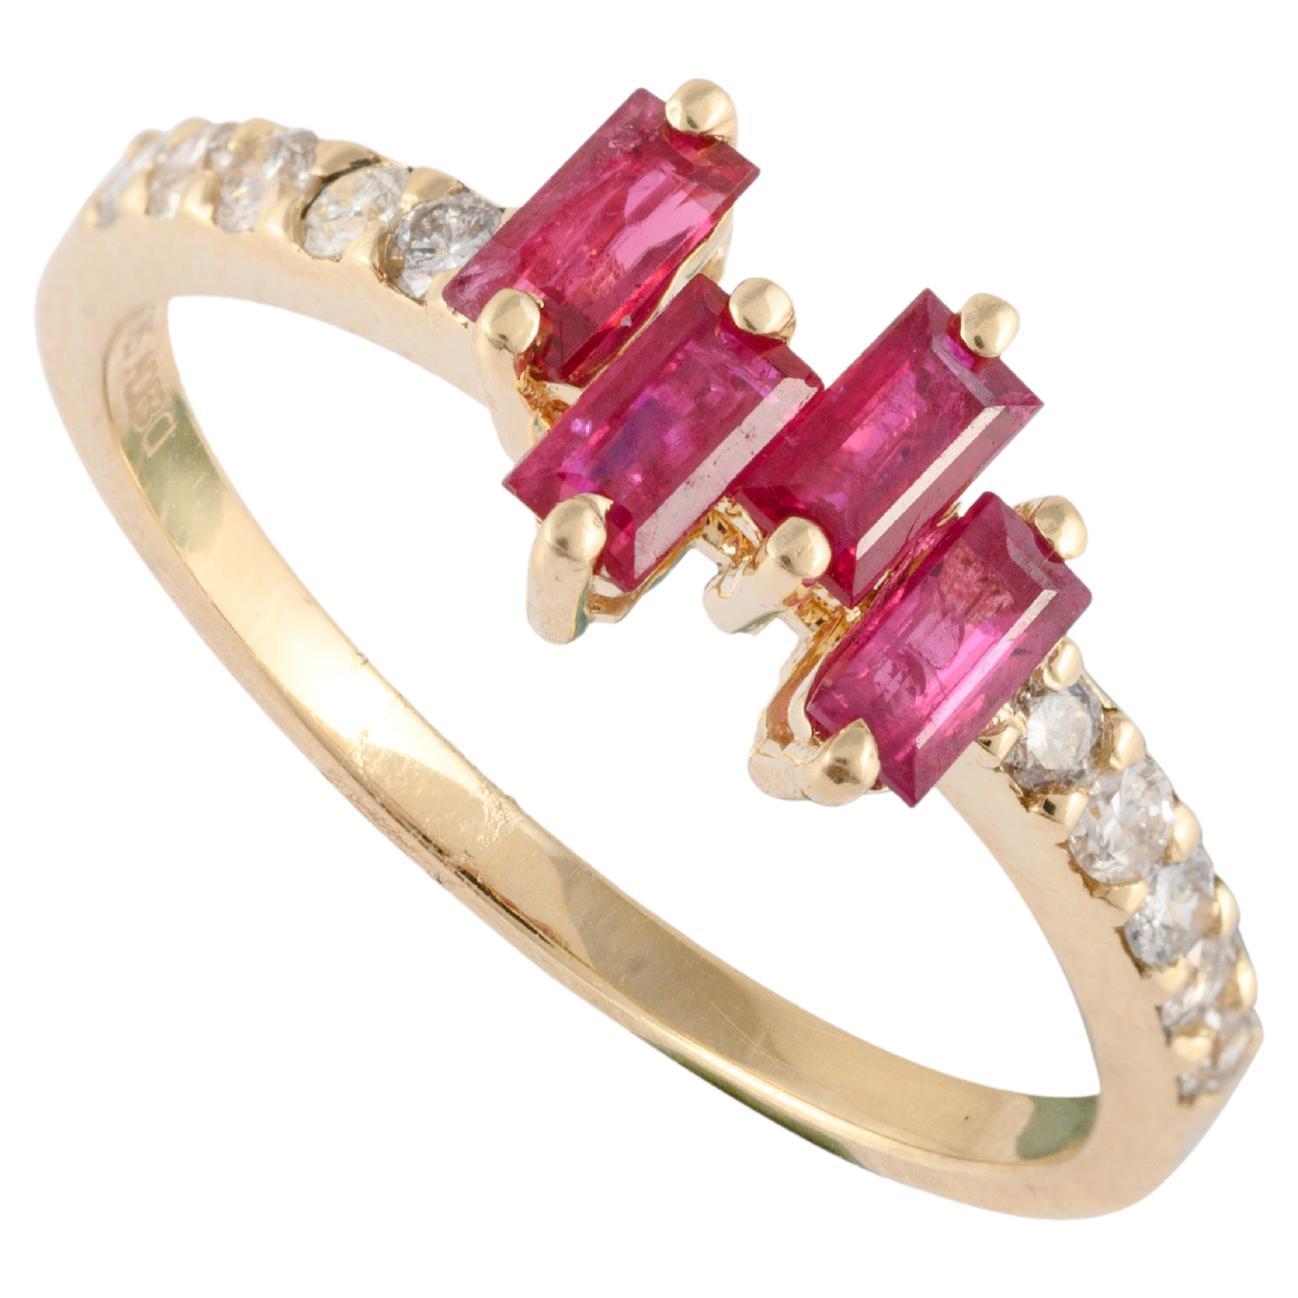 For Sale:  Baguette Ruby Diamond Ring Gift for Her in 14k Solid Yellow Gold